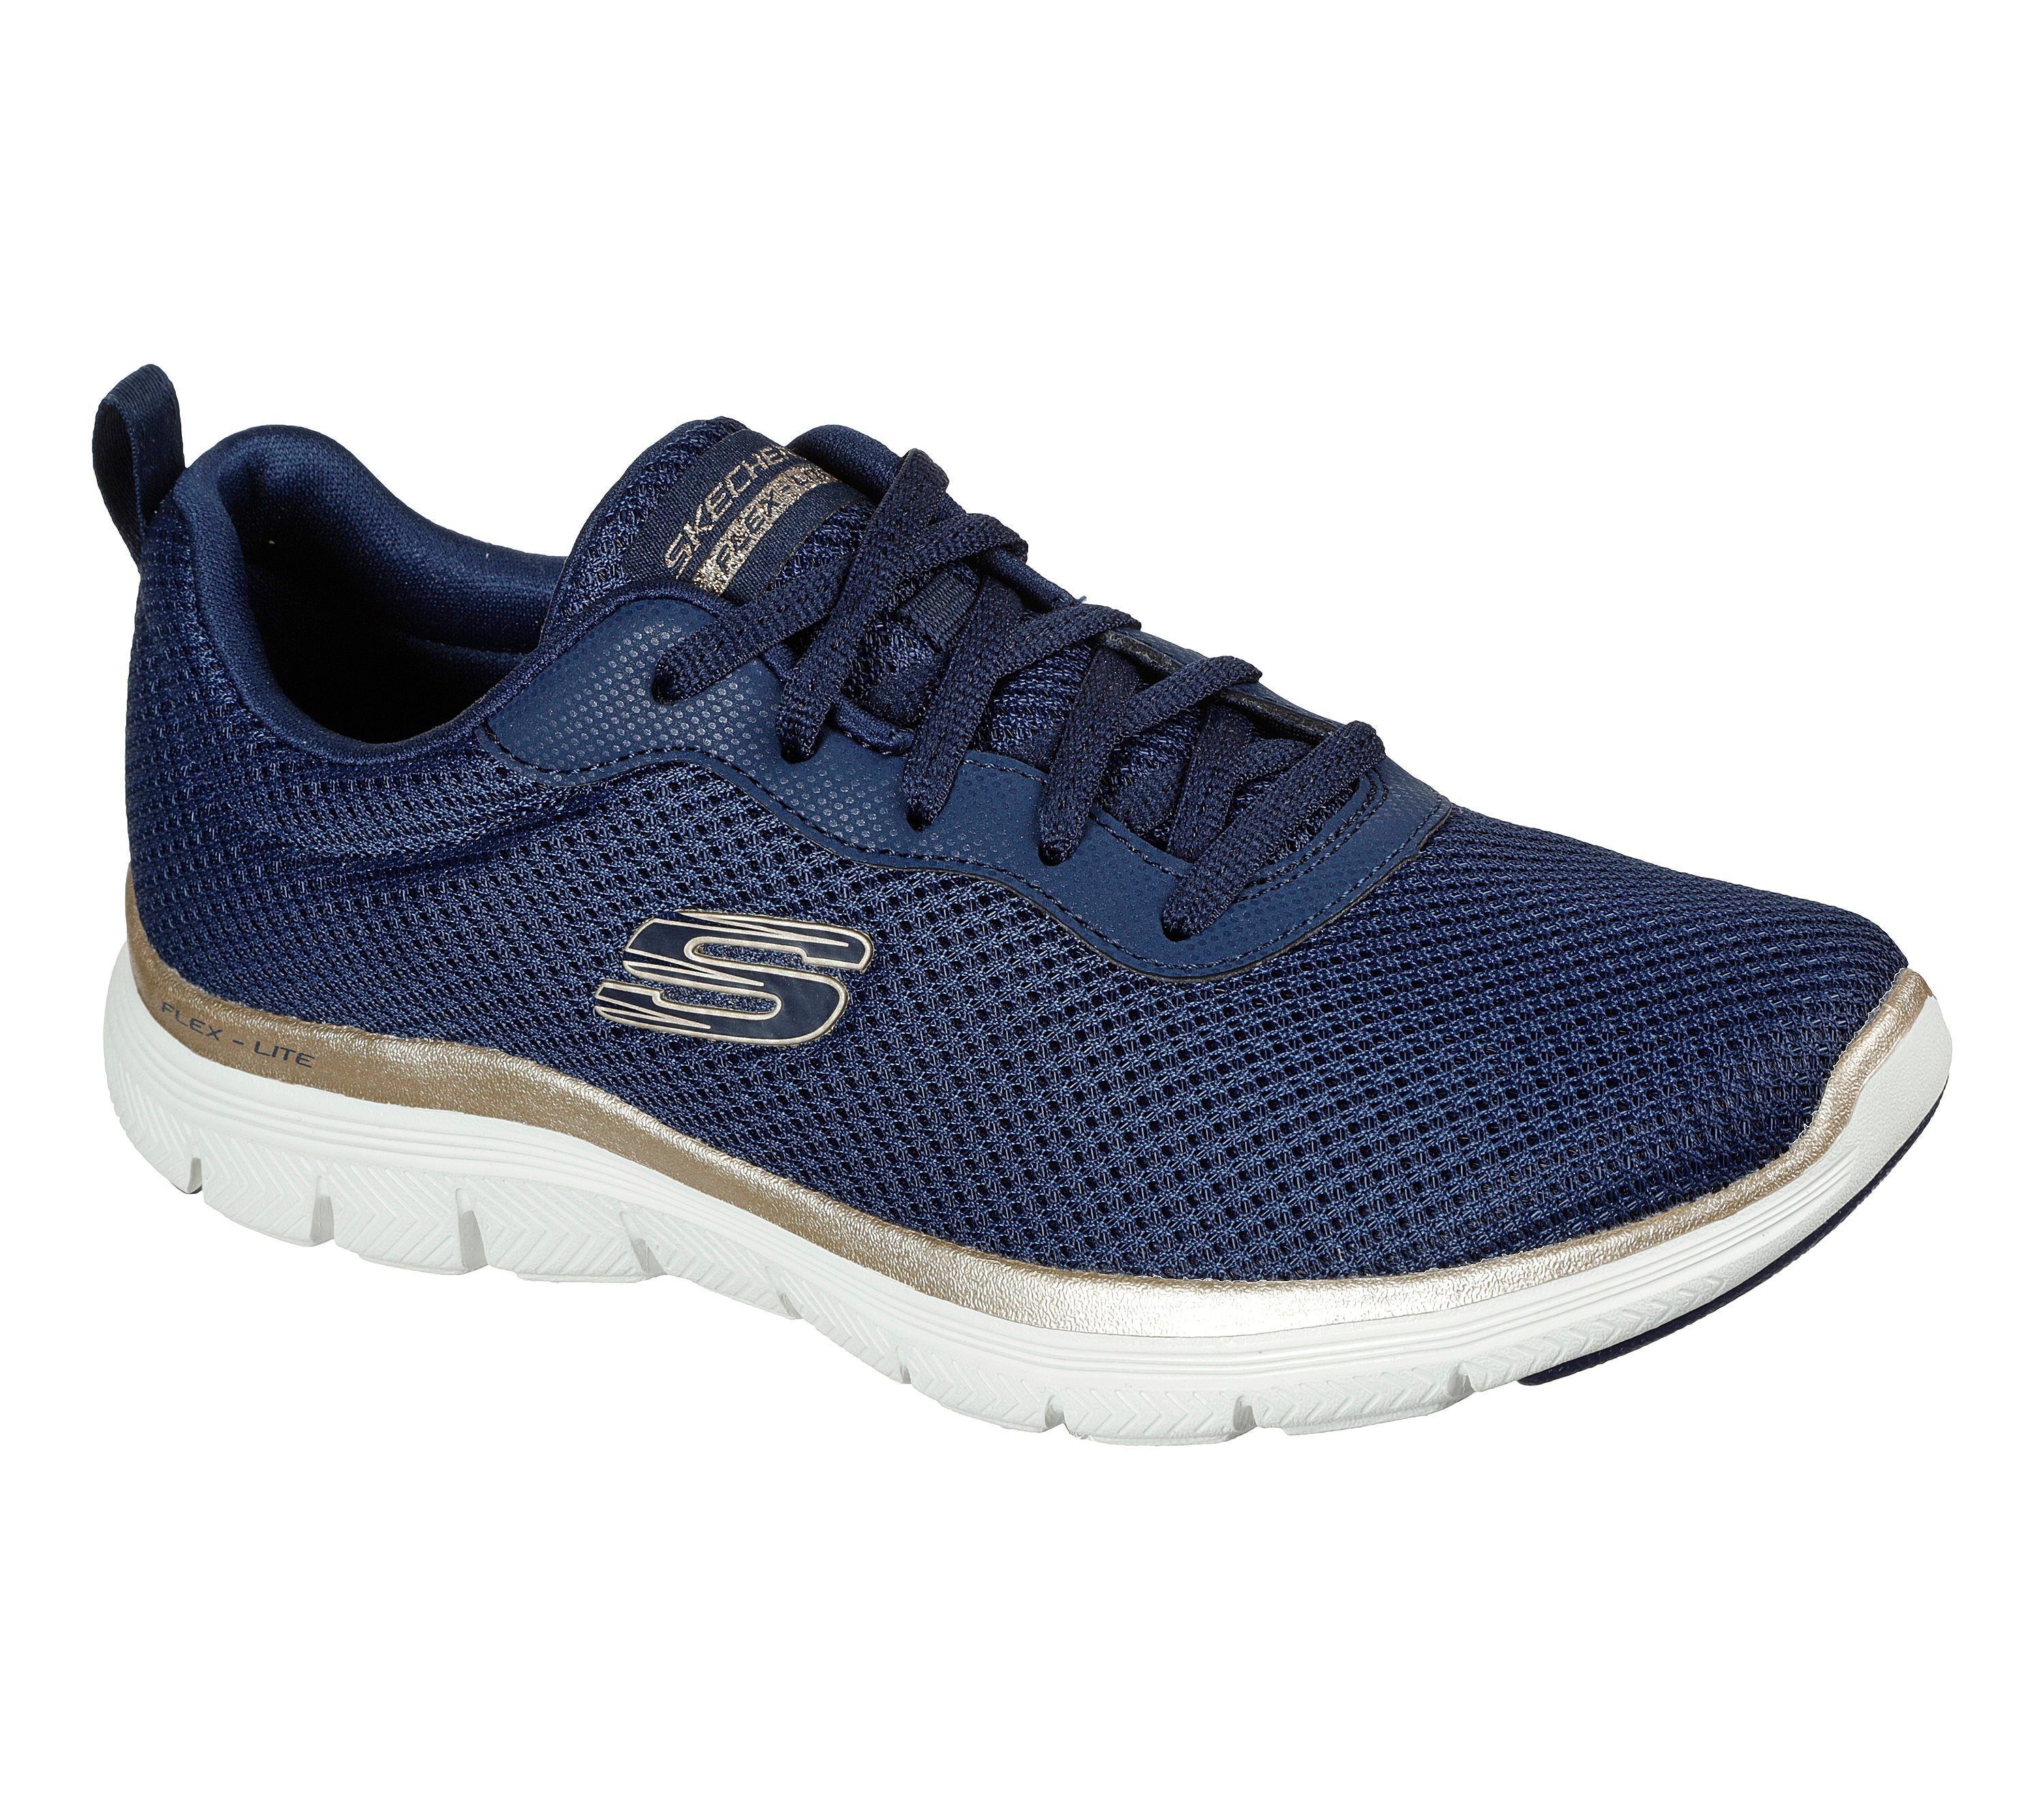 Skechers 149303 Flex appeal 4.0 Brilliant view Navy blue gold trainers ...